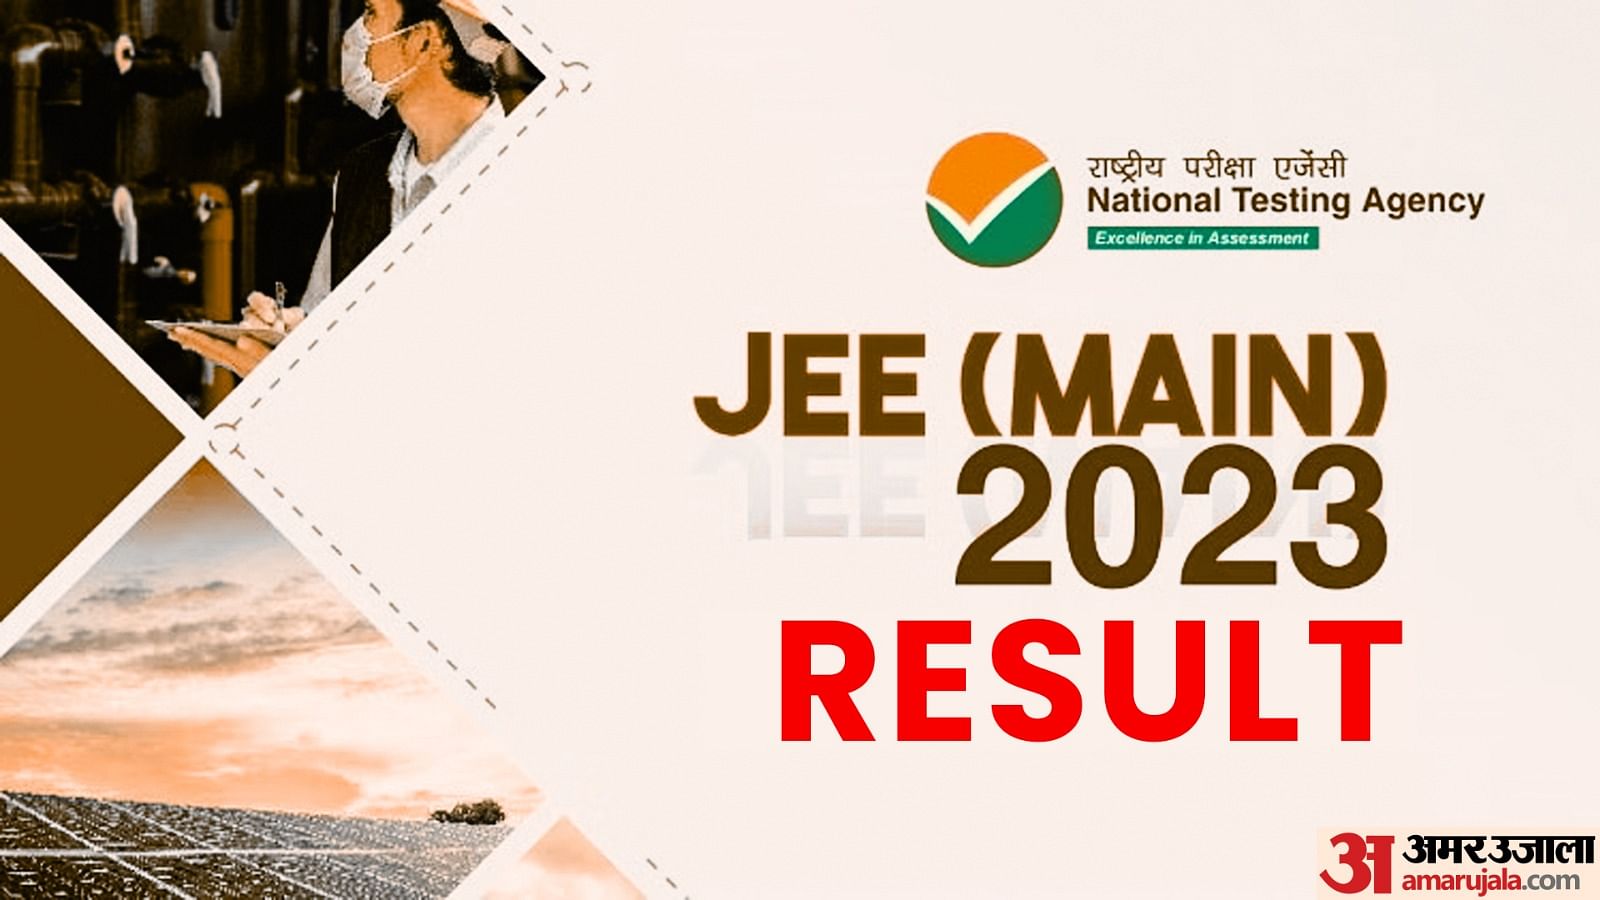 JEE Main 2023: Paper 2 Result Out, Know How to Check Here